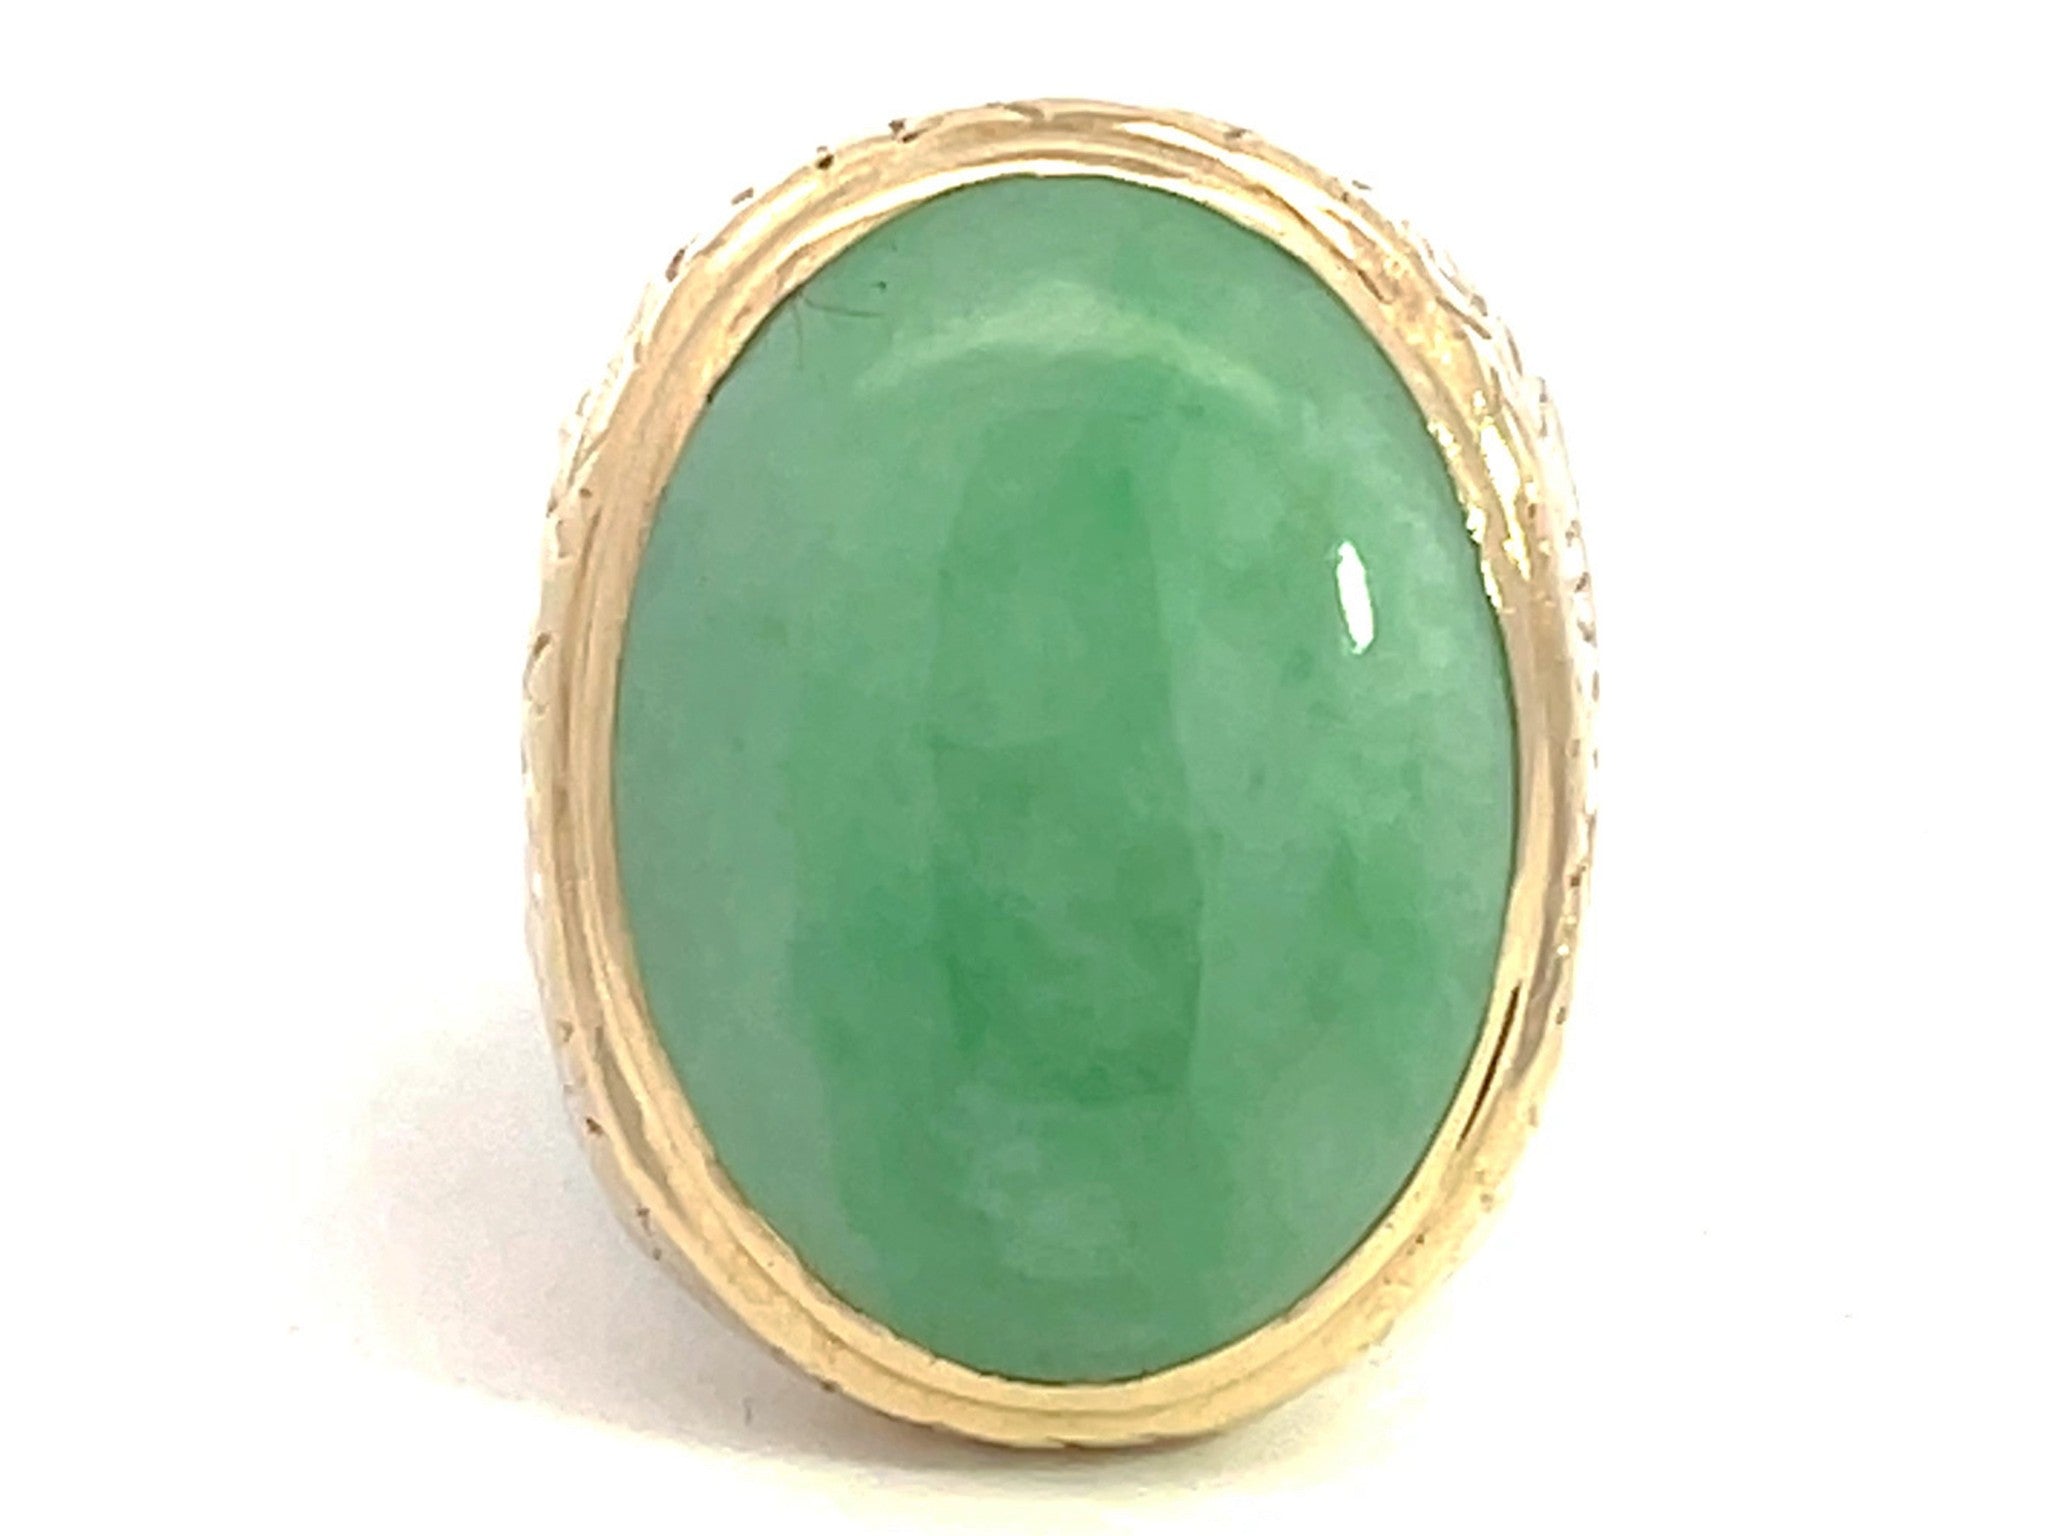 Oval Cabochon Green Jade Ring with Textured Bark Shoulders in 14K Yellow Gold